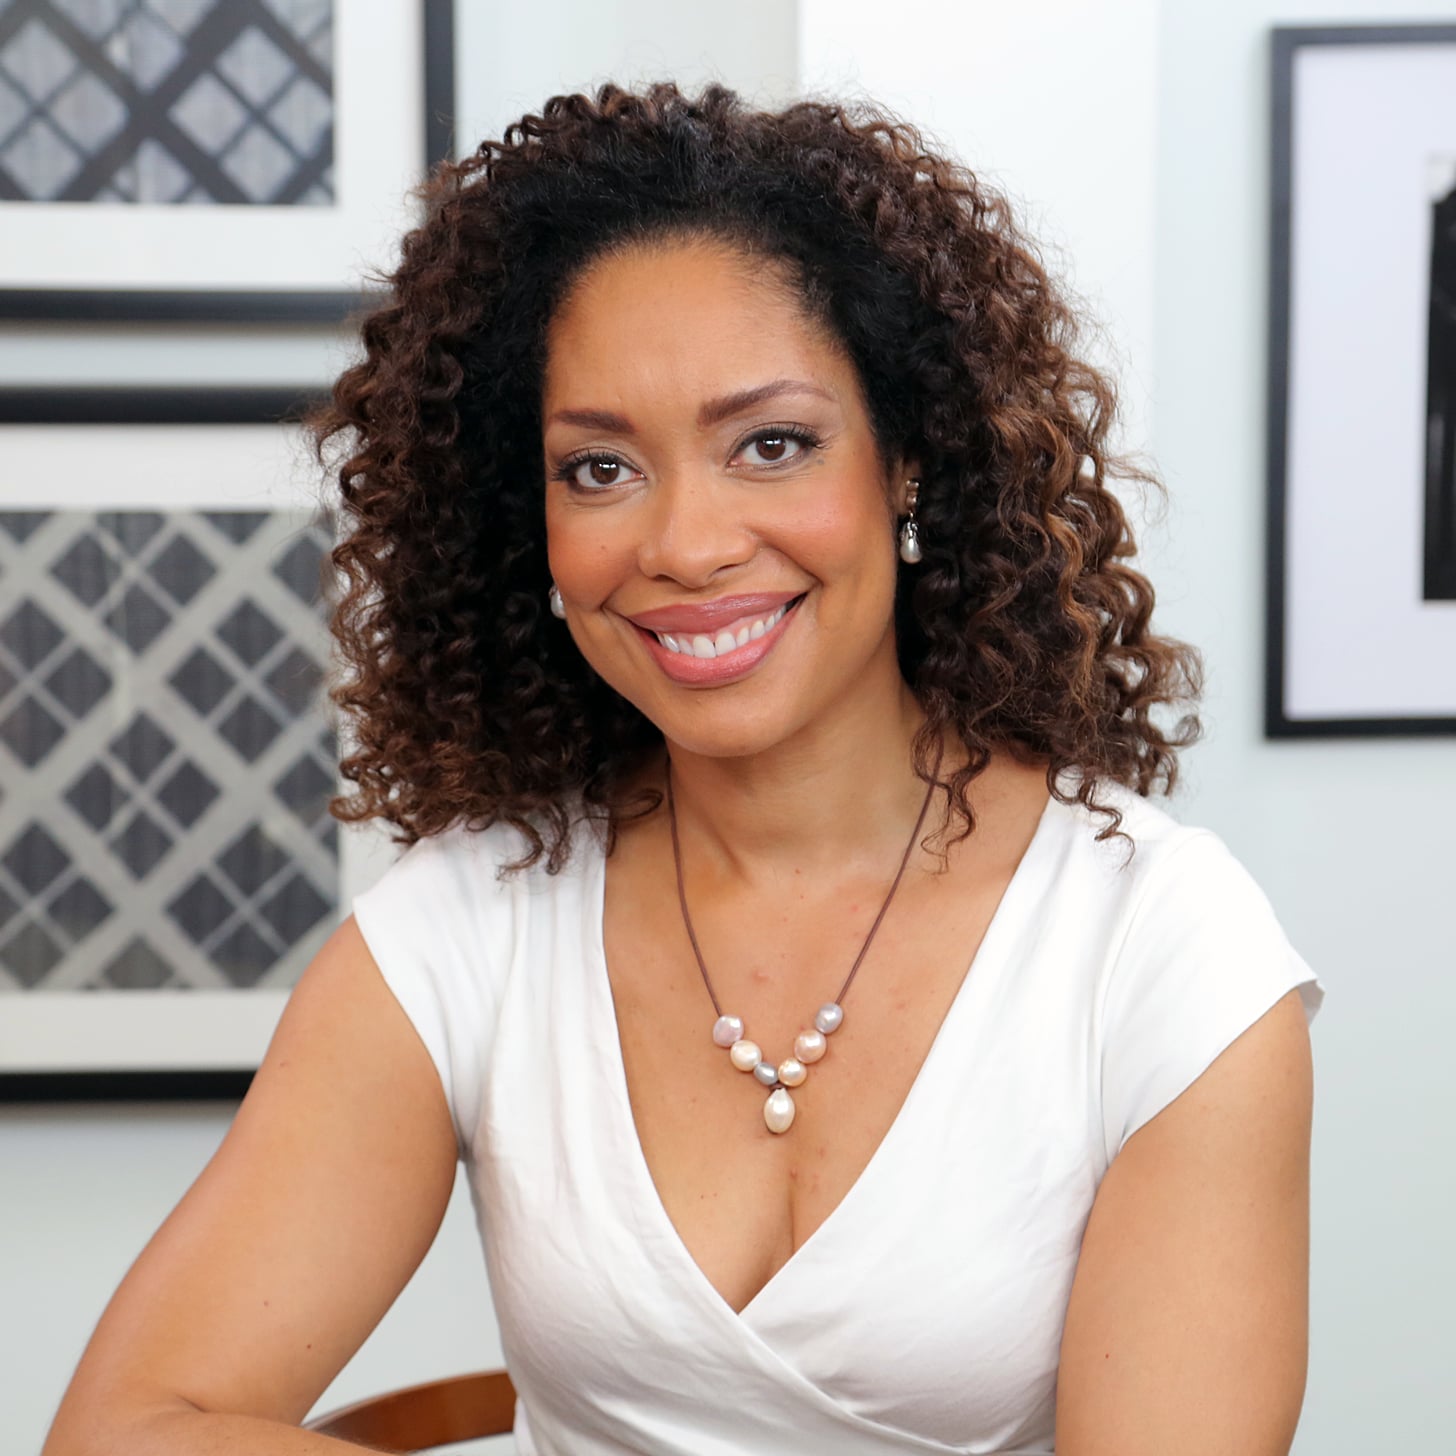 46 Gina Torres Nude Pictures Are Sure To Keep You Motivated 30